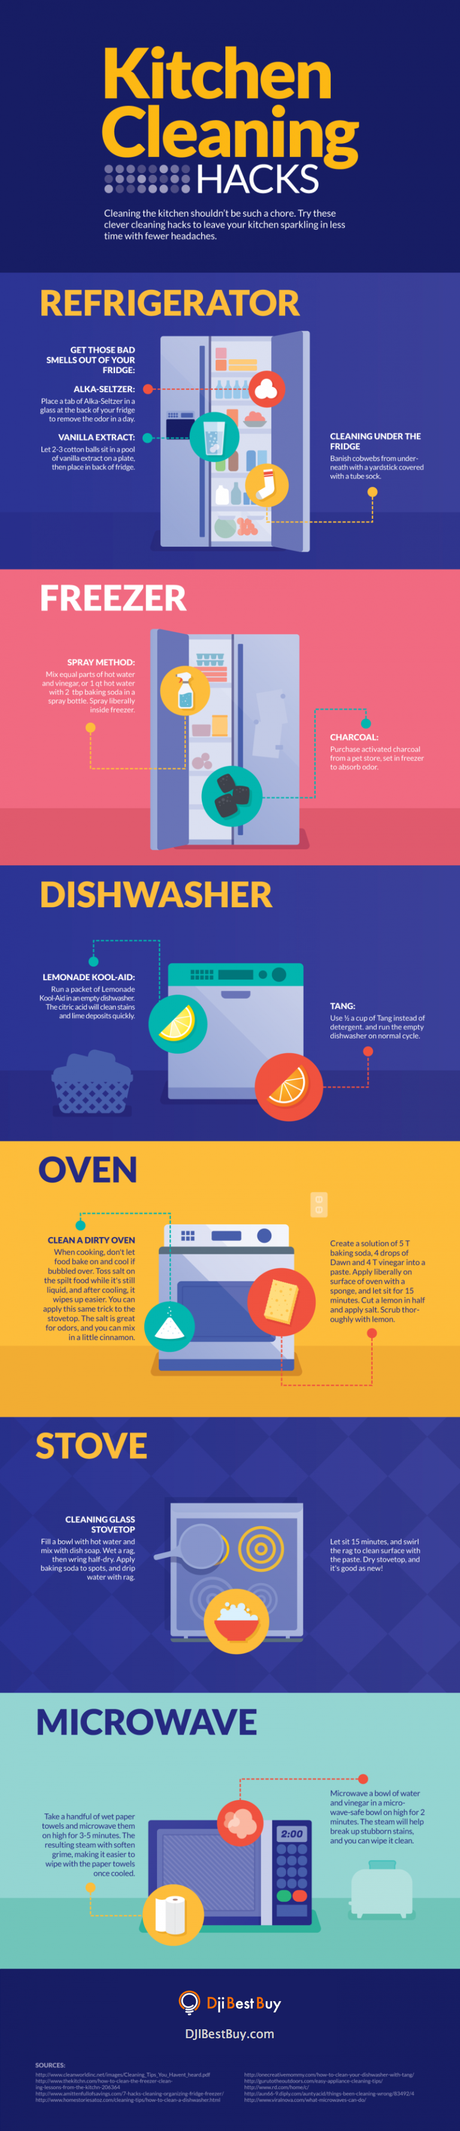 Infographic: Kitchen Appliances Cleaning Hacks